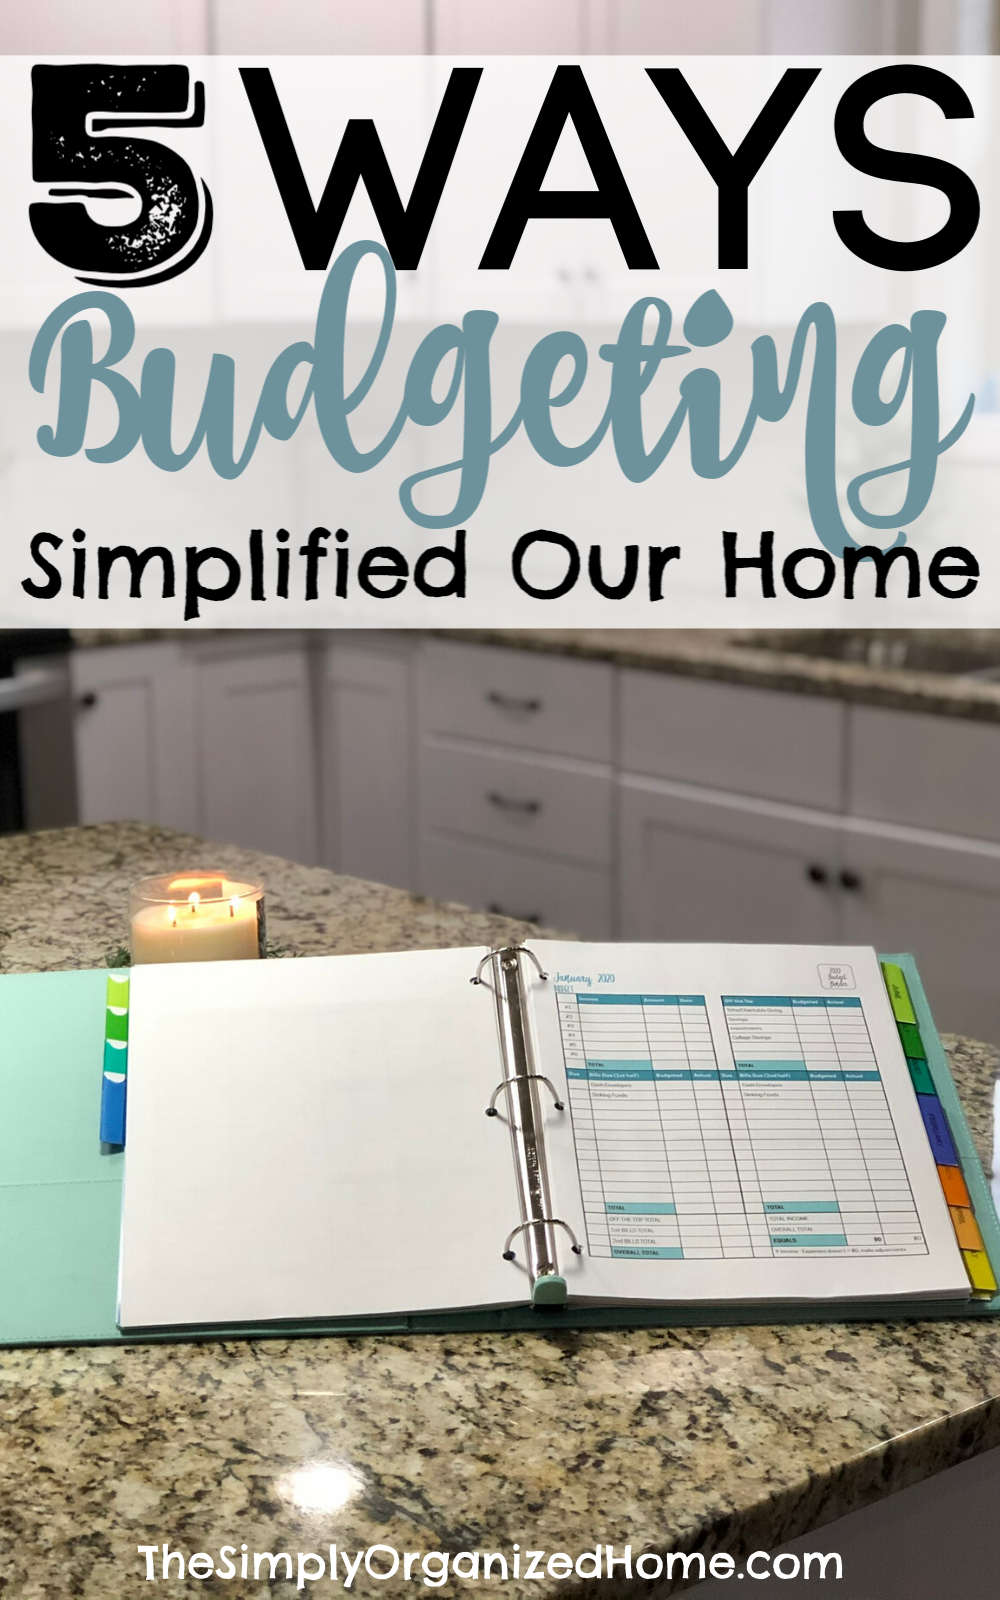 budgeting simplified our home